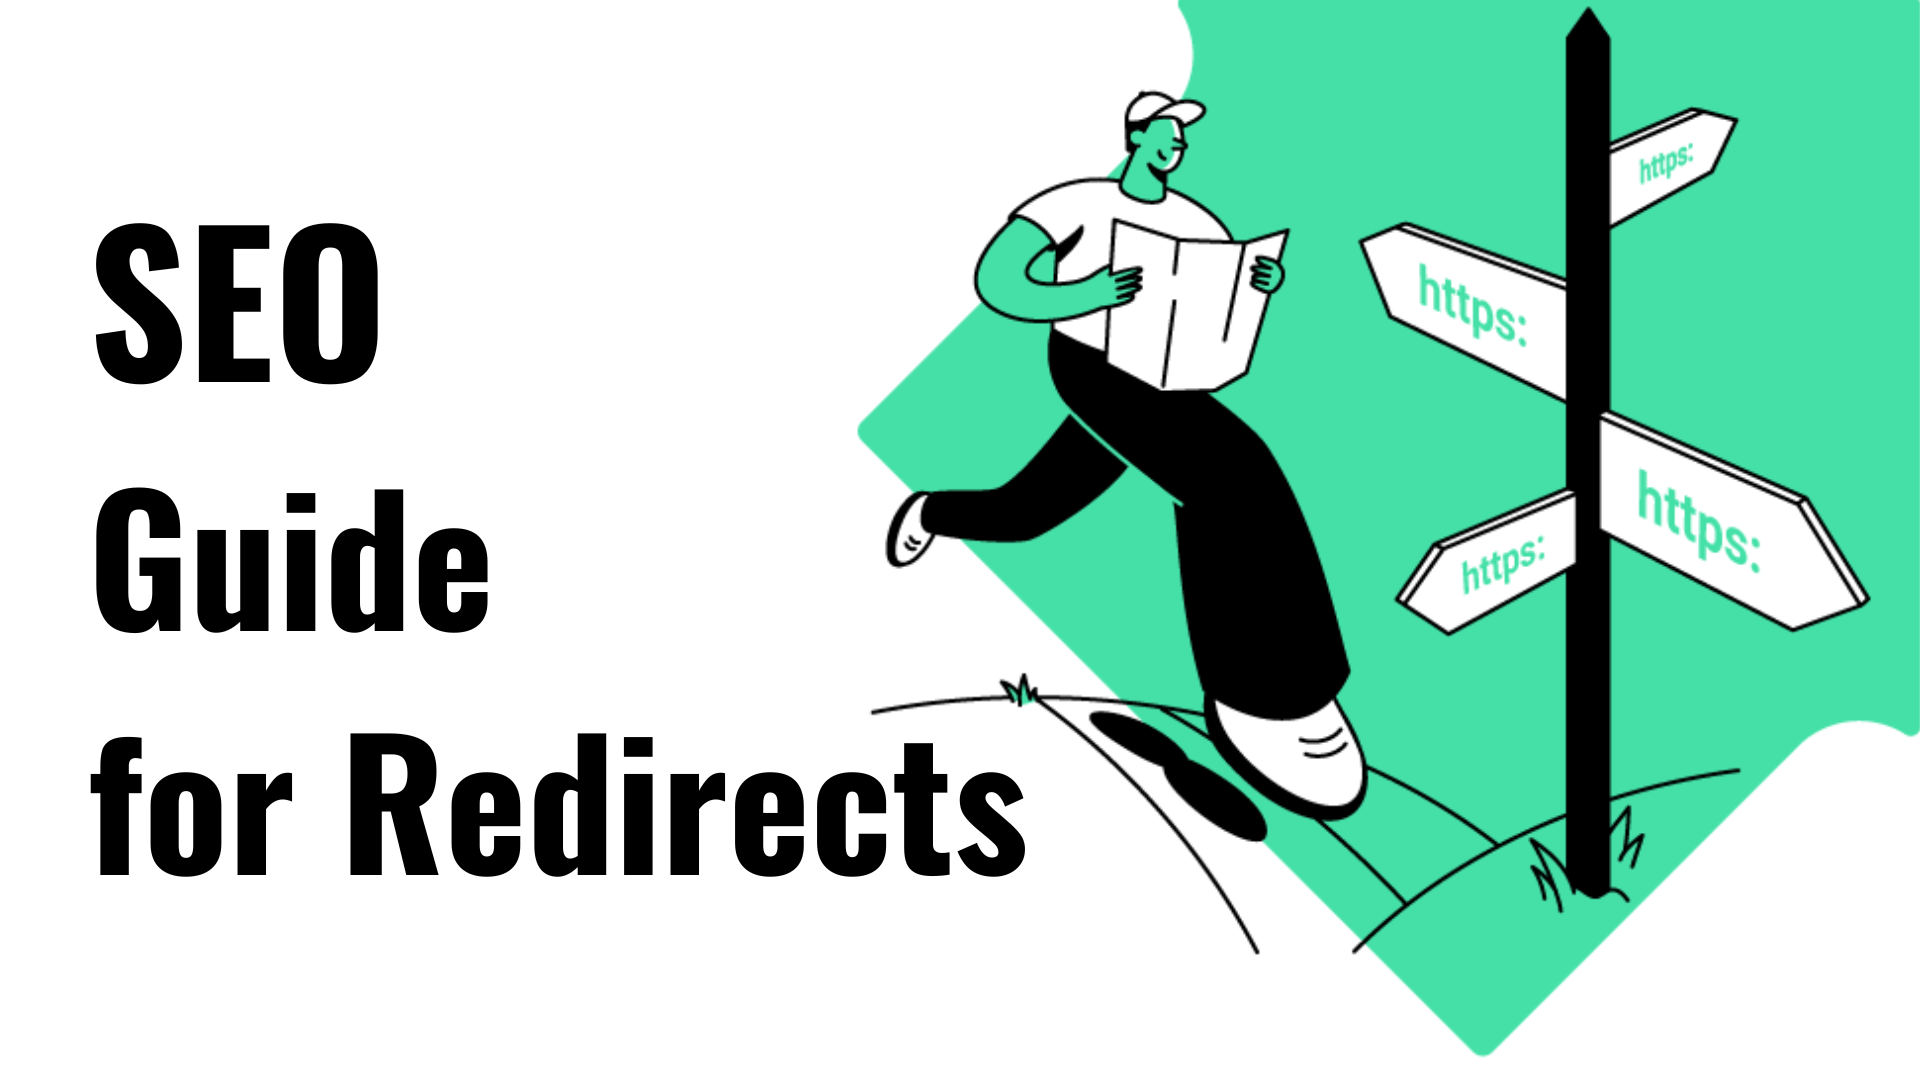 Experts SEO Guide Know About Redirects